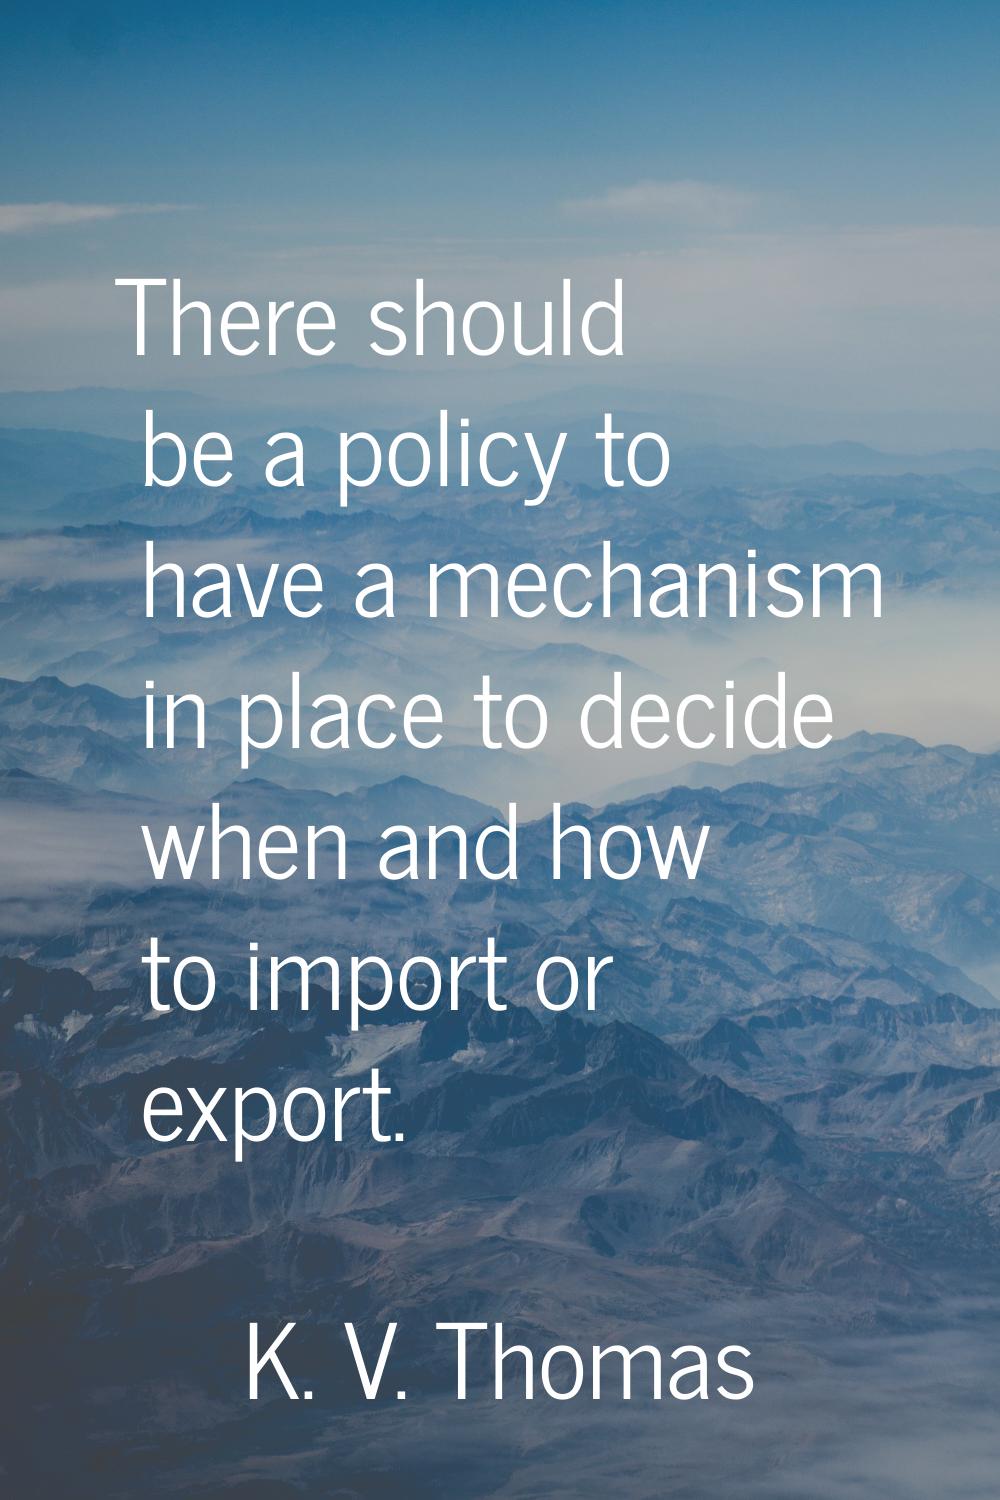 There should be a policy to have a mechanism in place to decide when and how to import or export.